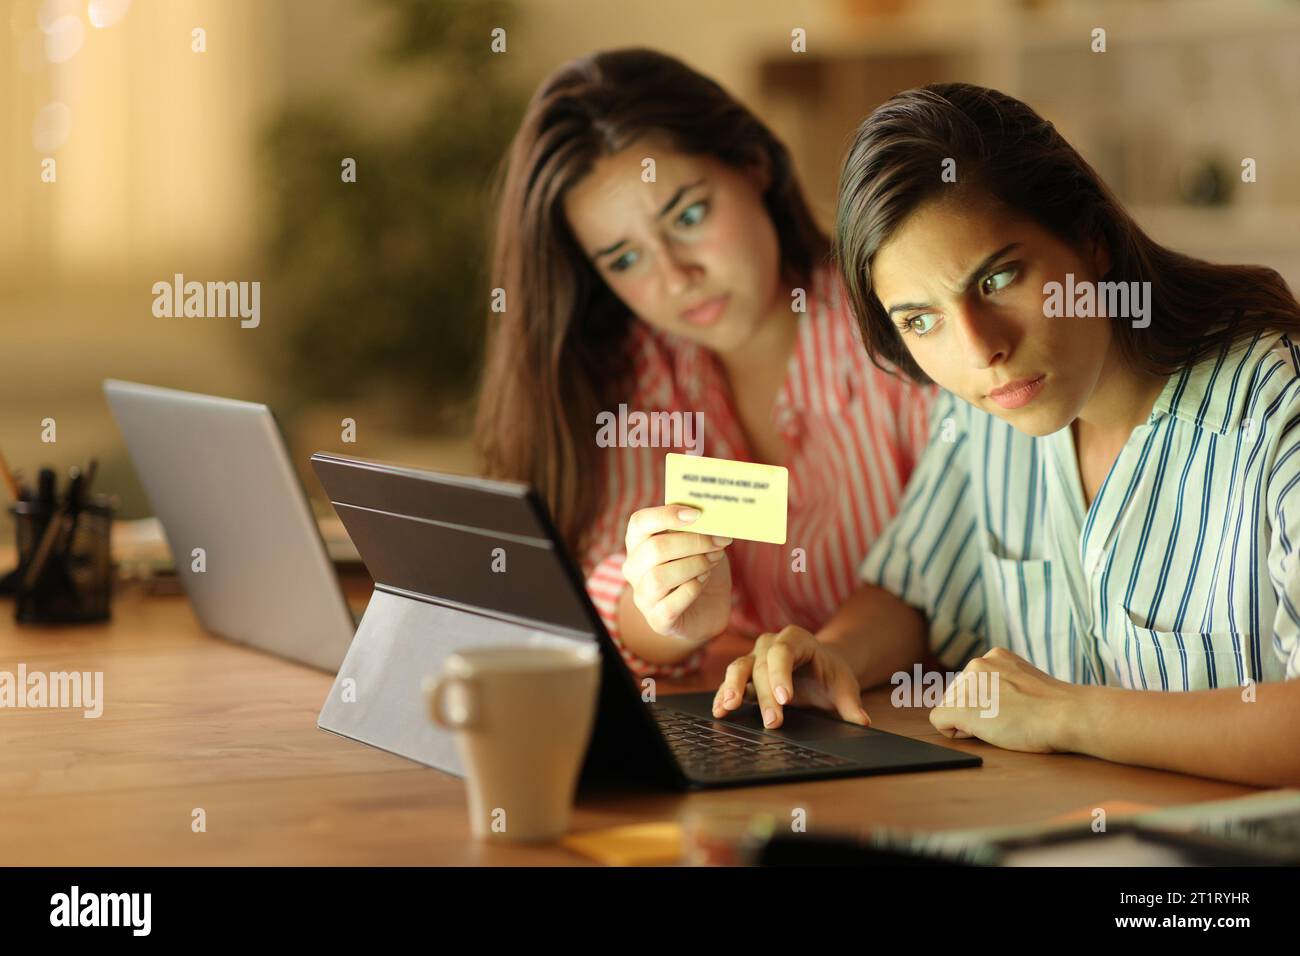 Two suspicious tele workers buying online with credit card and laptops in the night at home Stock Photo